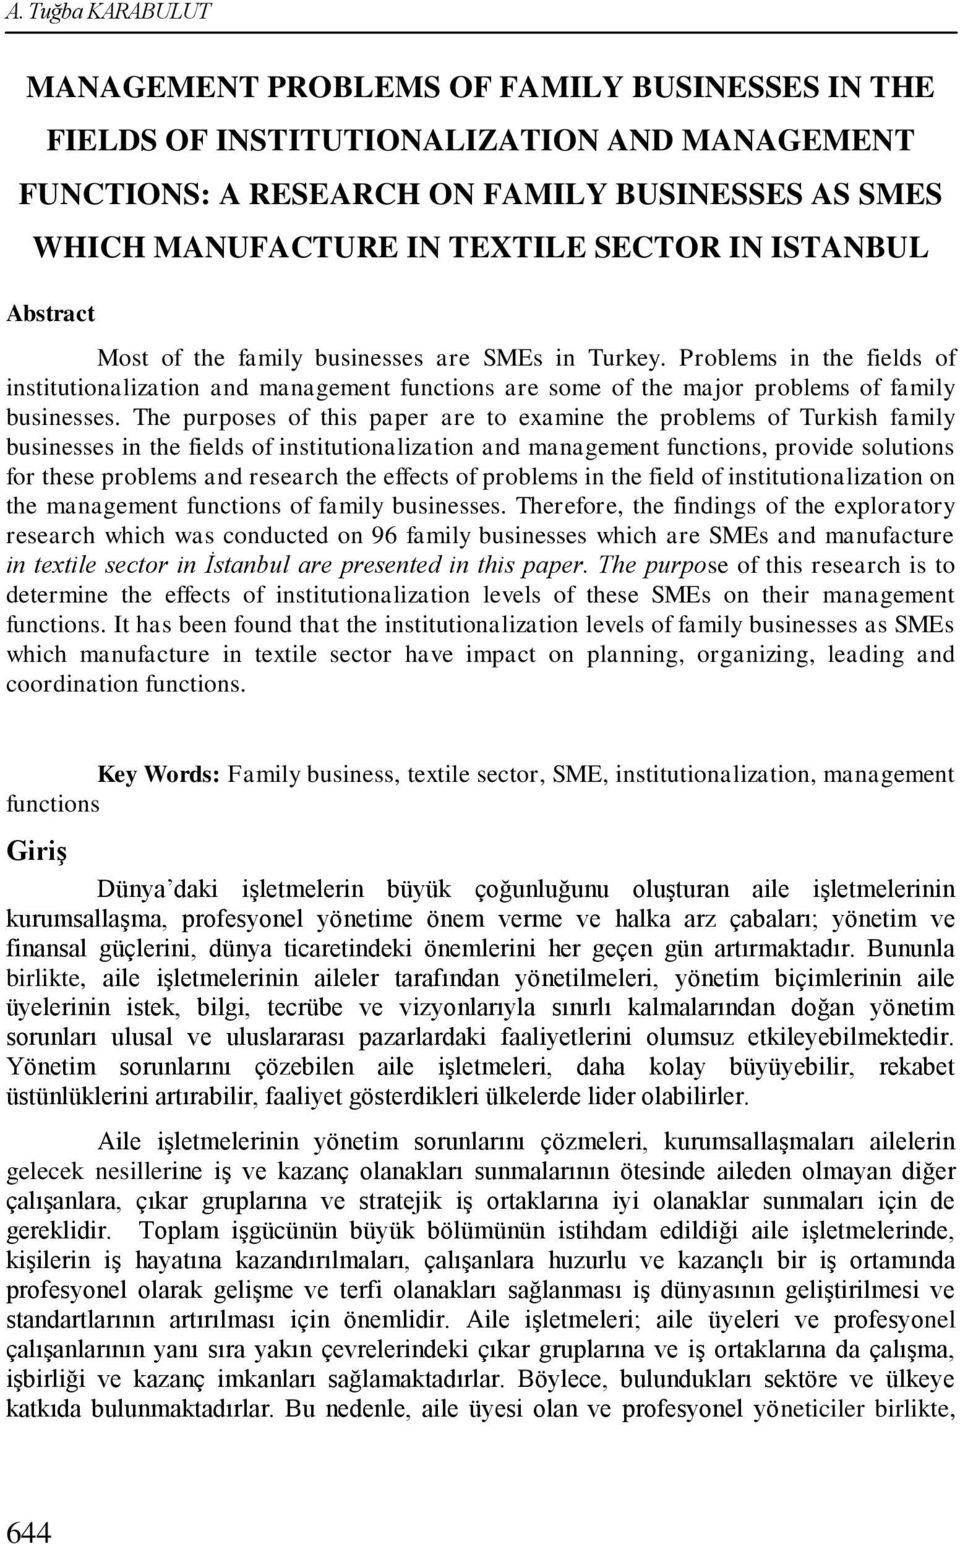 The purposes of this paper are to examine the problems of Turkish family businesses in the fields of institutionalization and management functions, provide solutions for these problems and research